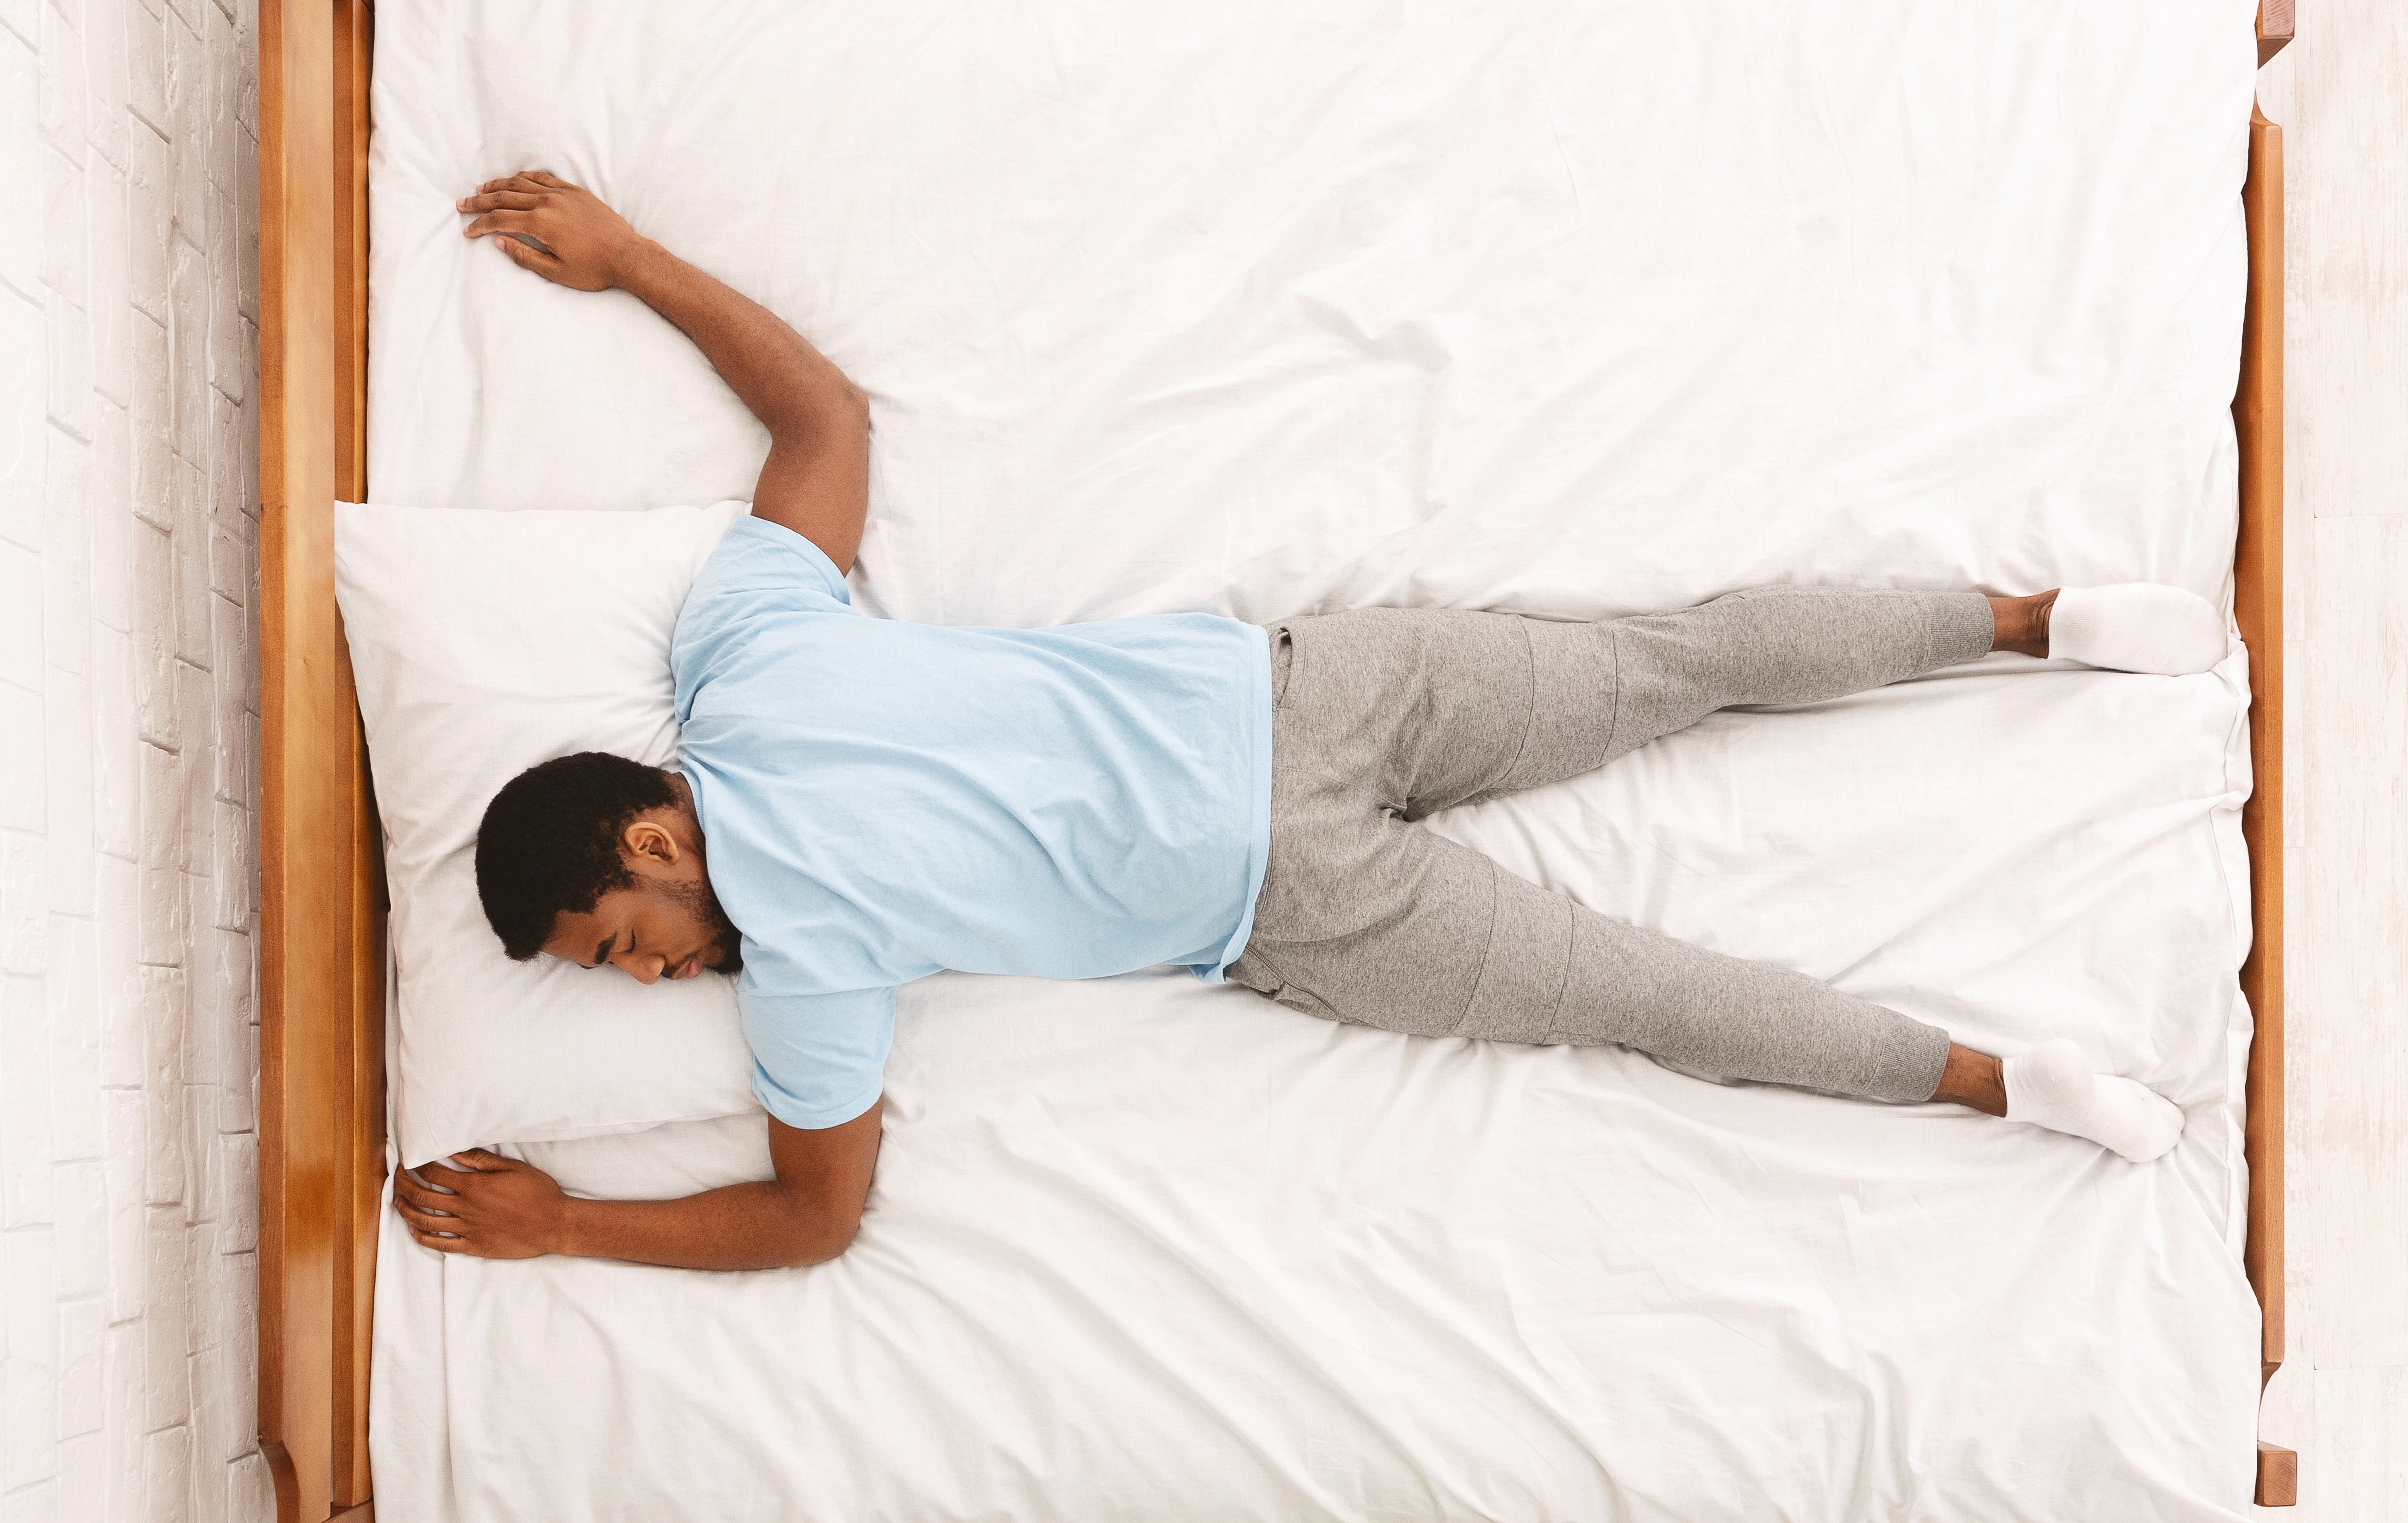 Sleeping on Your Stomach: Is It Bad to Do?